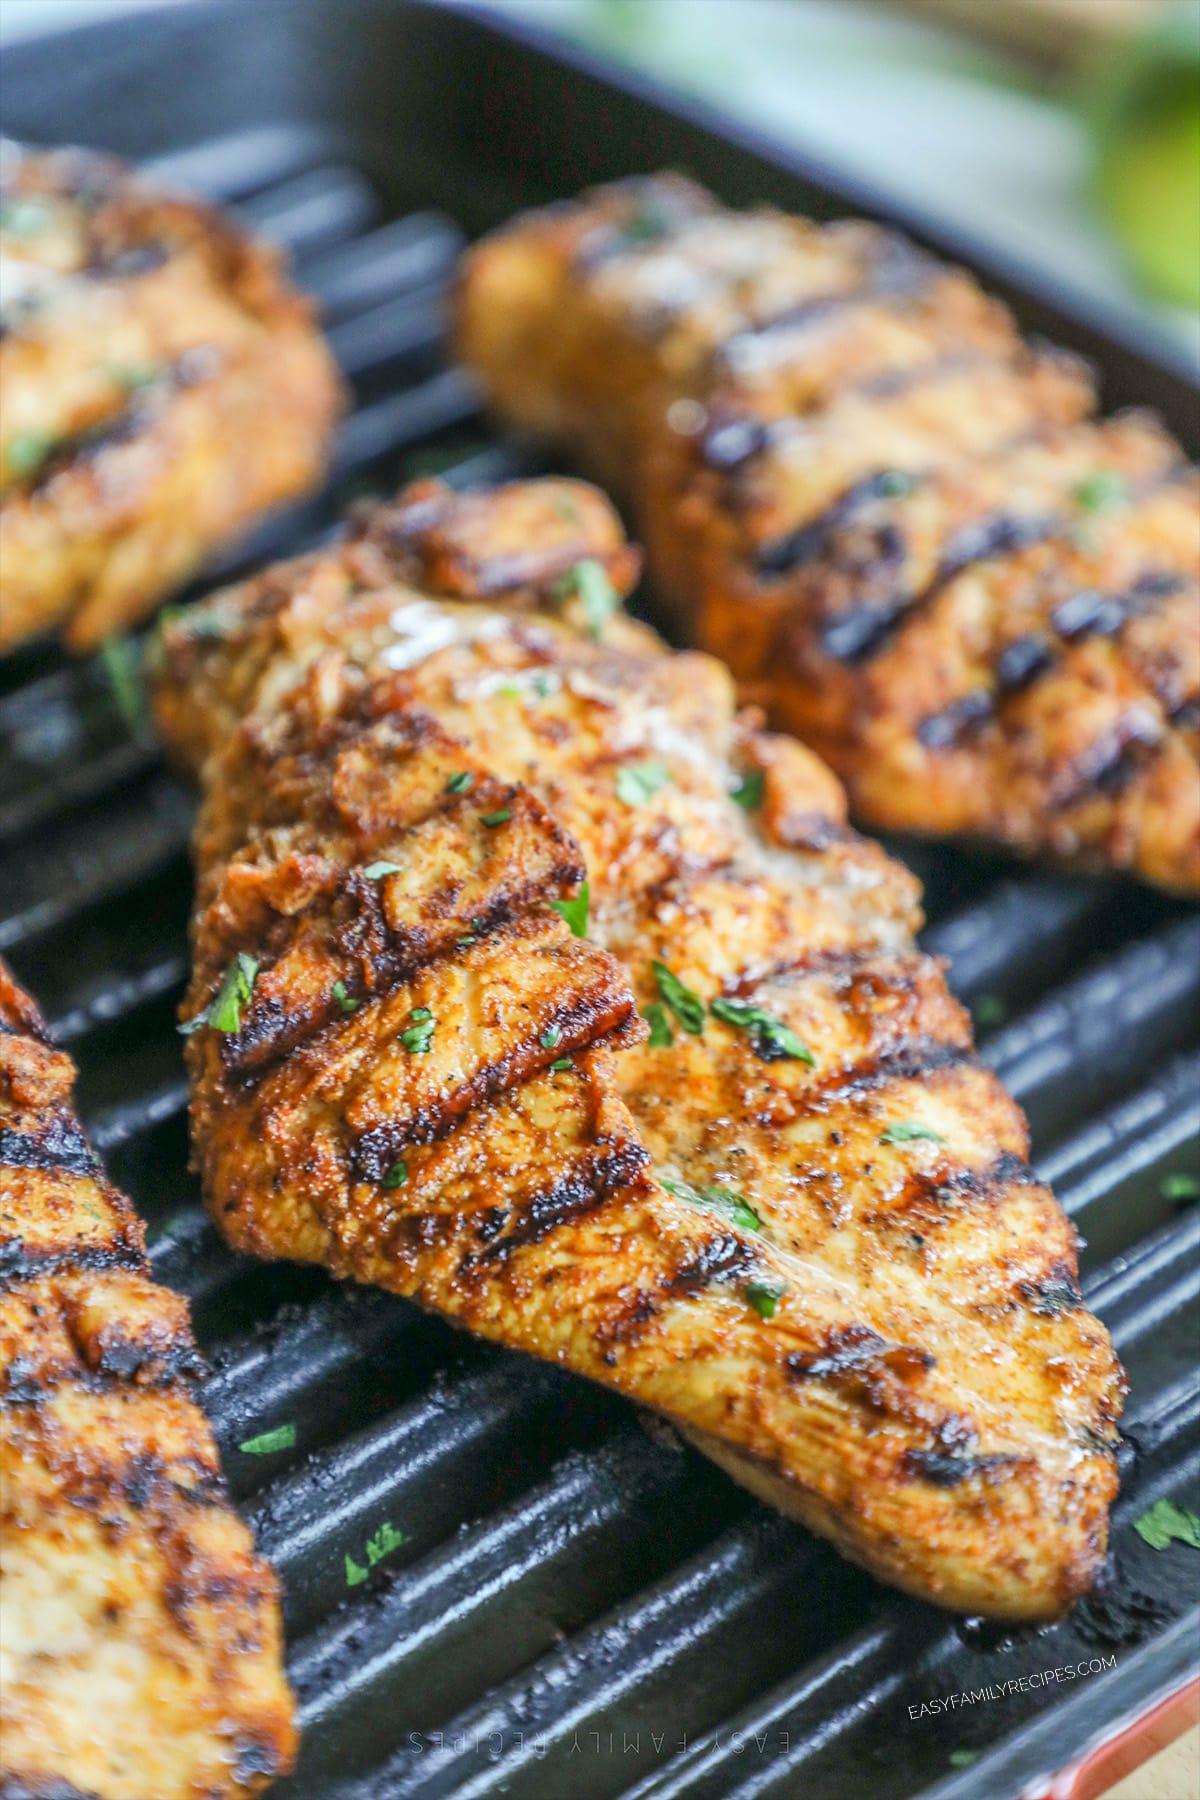 A close up of grilled southwest chicken being cooked, with herbs on top.